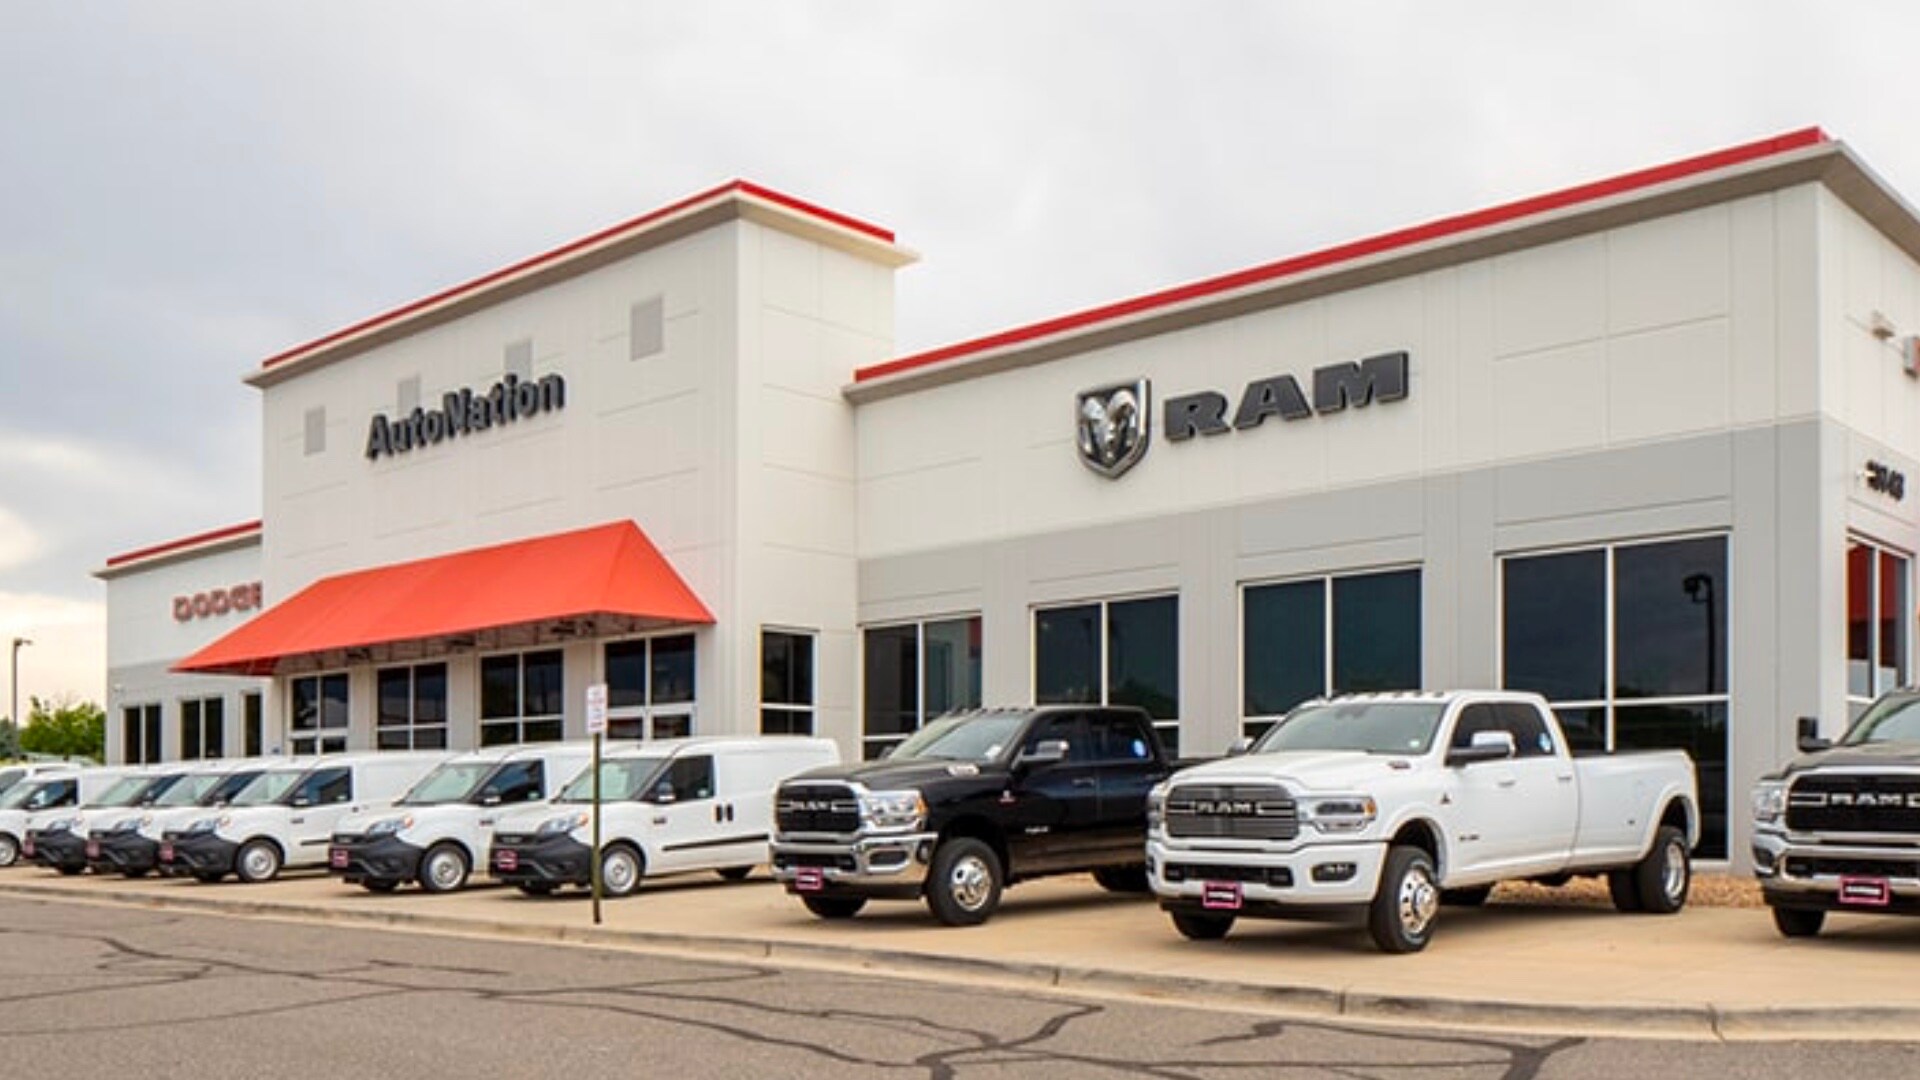 Exterior view of AutoNation Dodge Ram Arapahoe. There is a blue sky and many vehicles parked in front of the grey building. Some trees can be seen in the background.